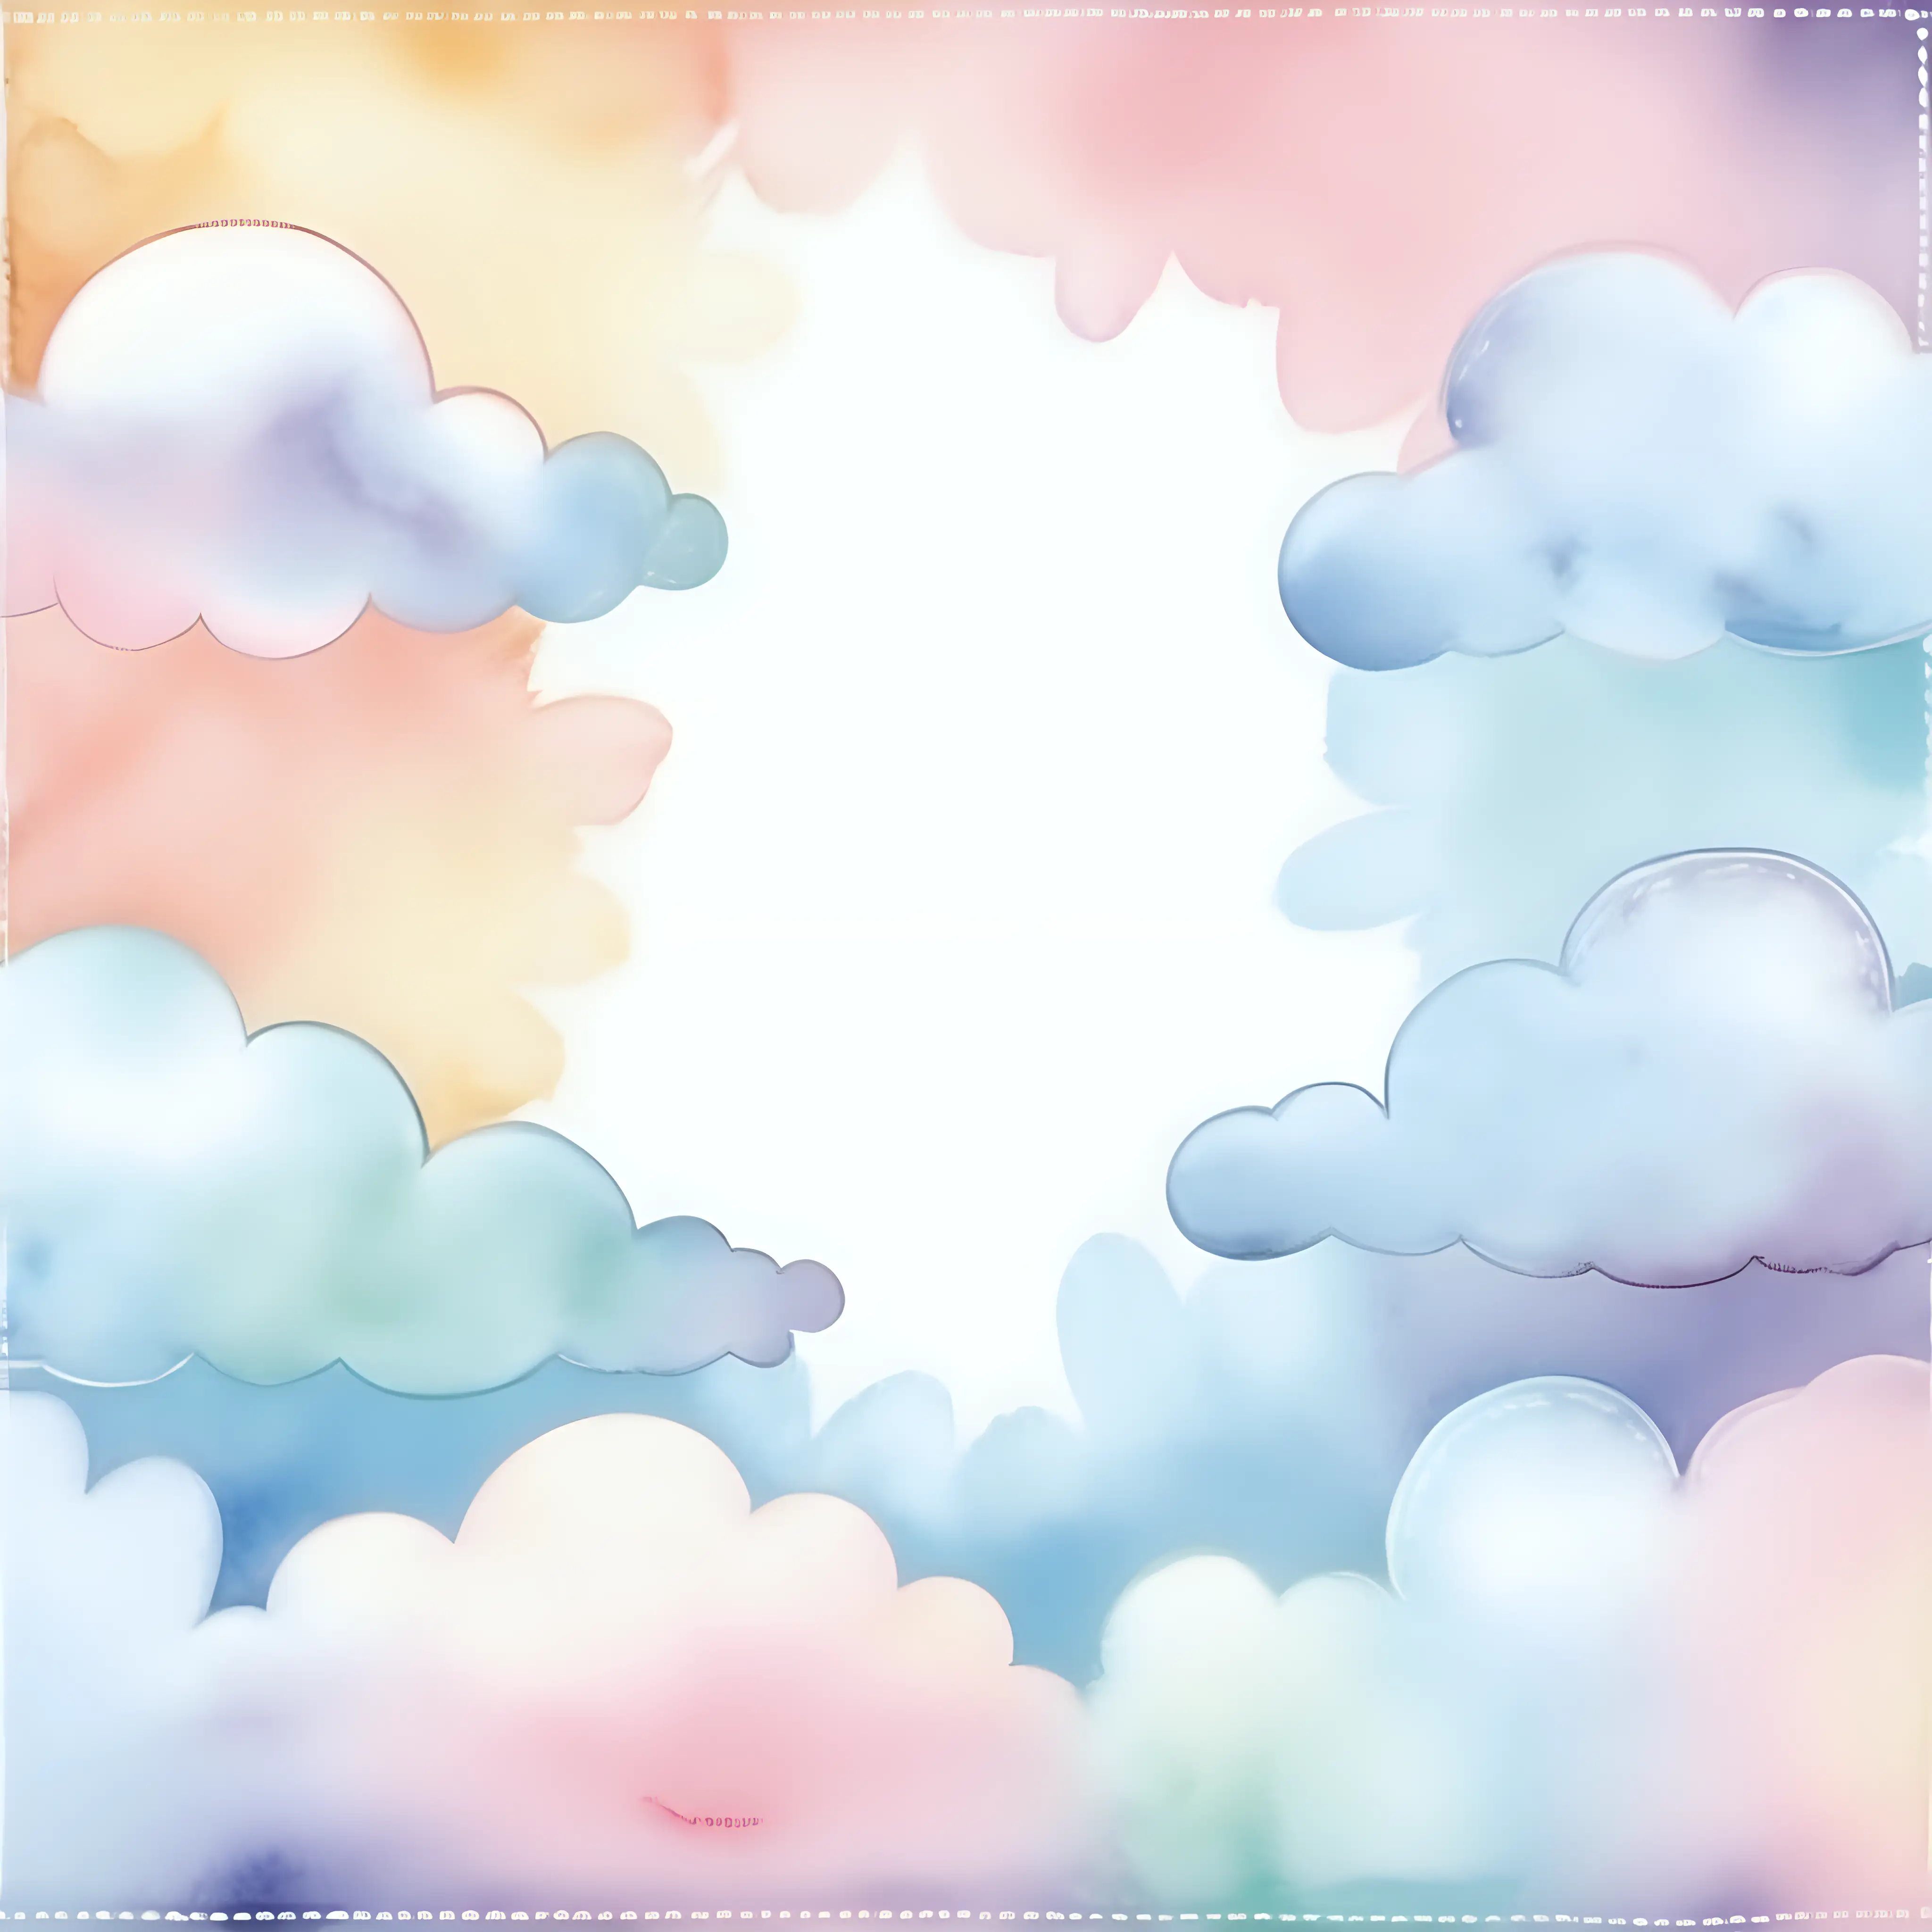 Pastel Cloud Border in Watercolored Style